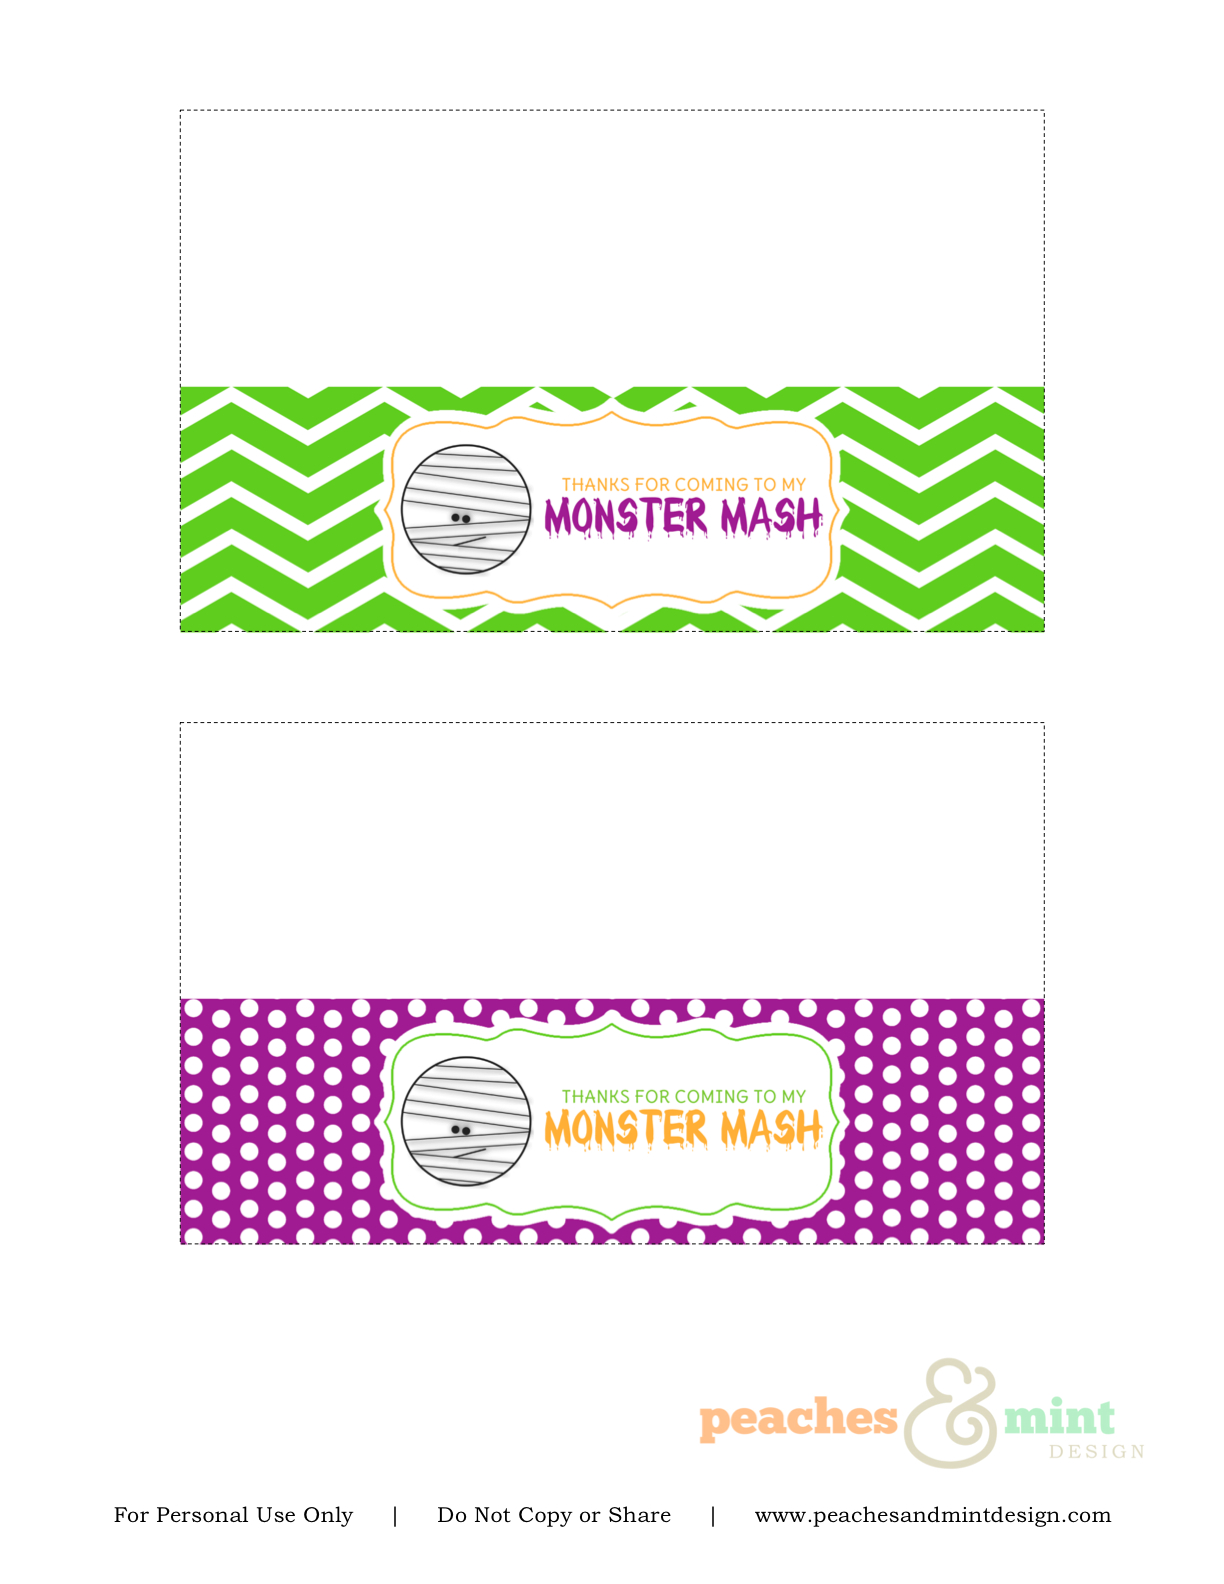 FREE Halloween Printables from Peaches Mint Design Catch My Party